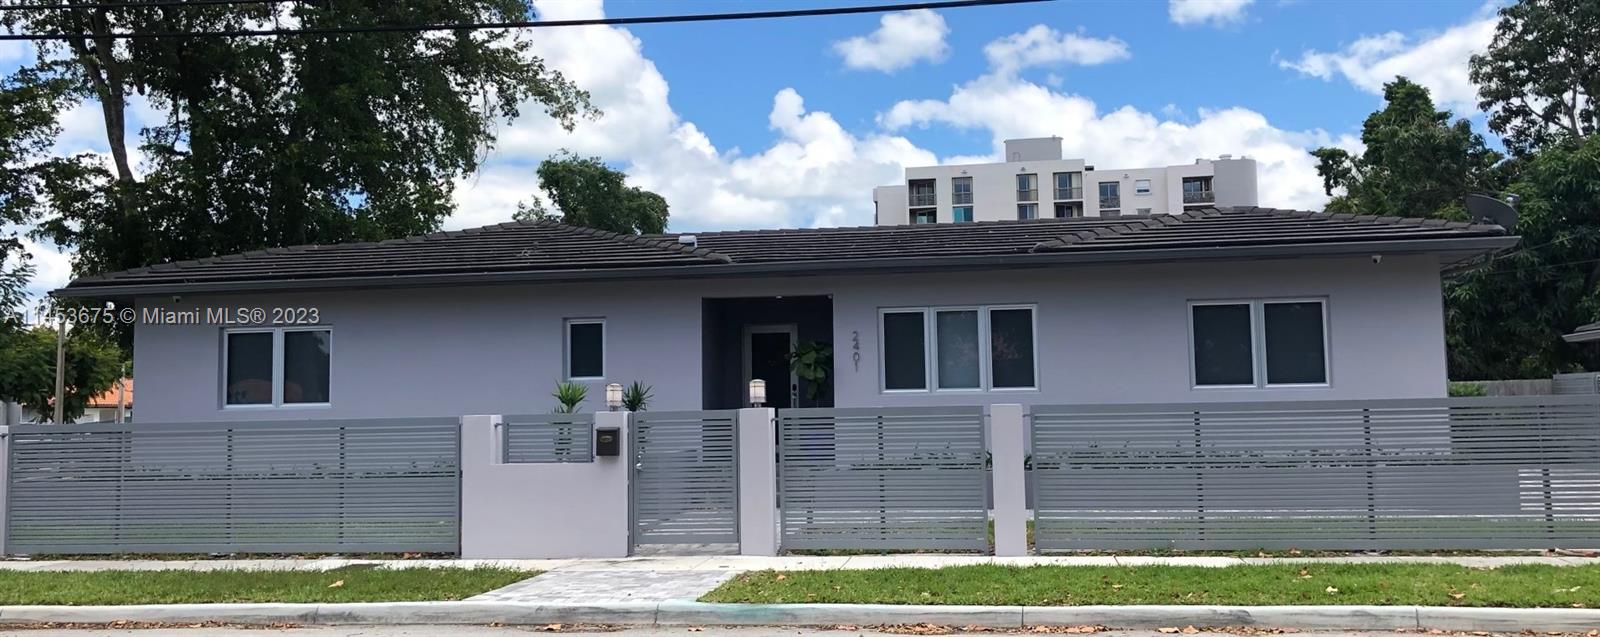 BEAUTIFUL SINGLE FAMILY HOME LOCATED ON A CORNER LOT IN THE ROADS! HIGHLY DESIRABLE AREA. THE HOME FEATURES: NEW ROOF, IMPACT WINDOWS & DOORS THROUGHOUT, TOTALLY REMODELED HOME WITH QUARTZ COUNTER-TOP, S/S APPLIANCES, PORCELAIN TILES FLOORS., WASHER/DRYER + HOME HAS
ELECTRONICS GATES WITH PLENTY OF PARKING. MINUTES FROM CORAL GABLES, KEY BISCAYNE, BRICKELL AVE, DOWNTOWN, I-95 & LESS THAN 30 MINUTES FROM MIAMI INTERNATIONAL AIRPORT. PARKS ALL AROUND (TRIANGLE, SIMPSON & ALICE WAINWRIGHT). THIS HOME IS BEING UTILIZED AND MAXIMIZED FOR POTENTIAL
AS AN ALF (ASSISTED LIVING FACILITY). AS AN ALF IT BOASTS 6 LUXURY BED UNITS FOR RESIDENTS. CASH FLOW & PRICE APPRECIATION WITH THIS INVESTMENT!